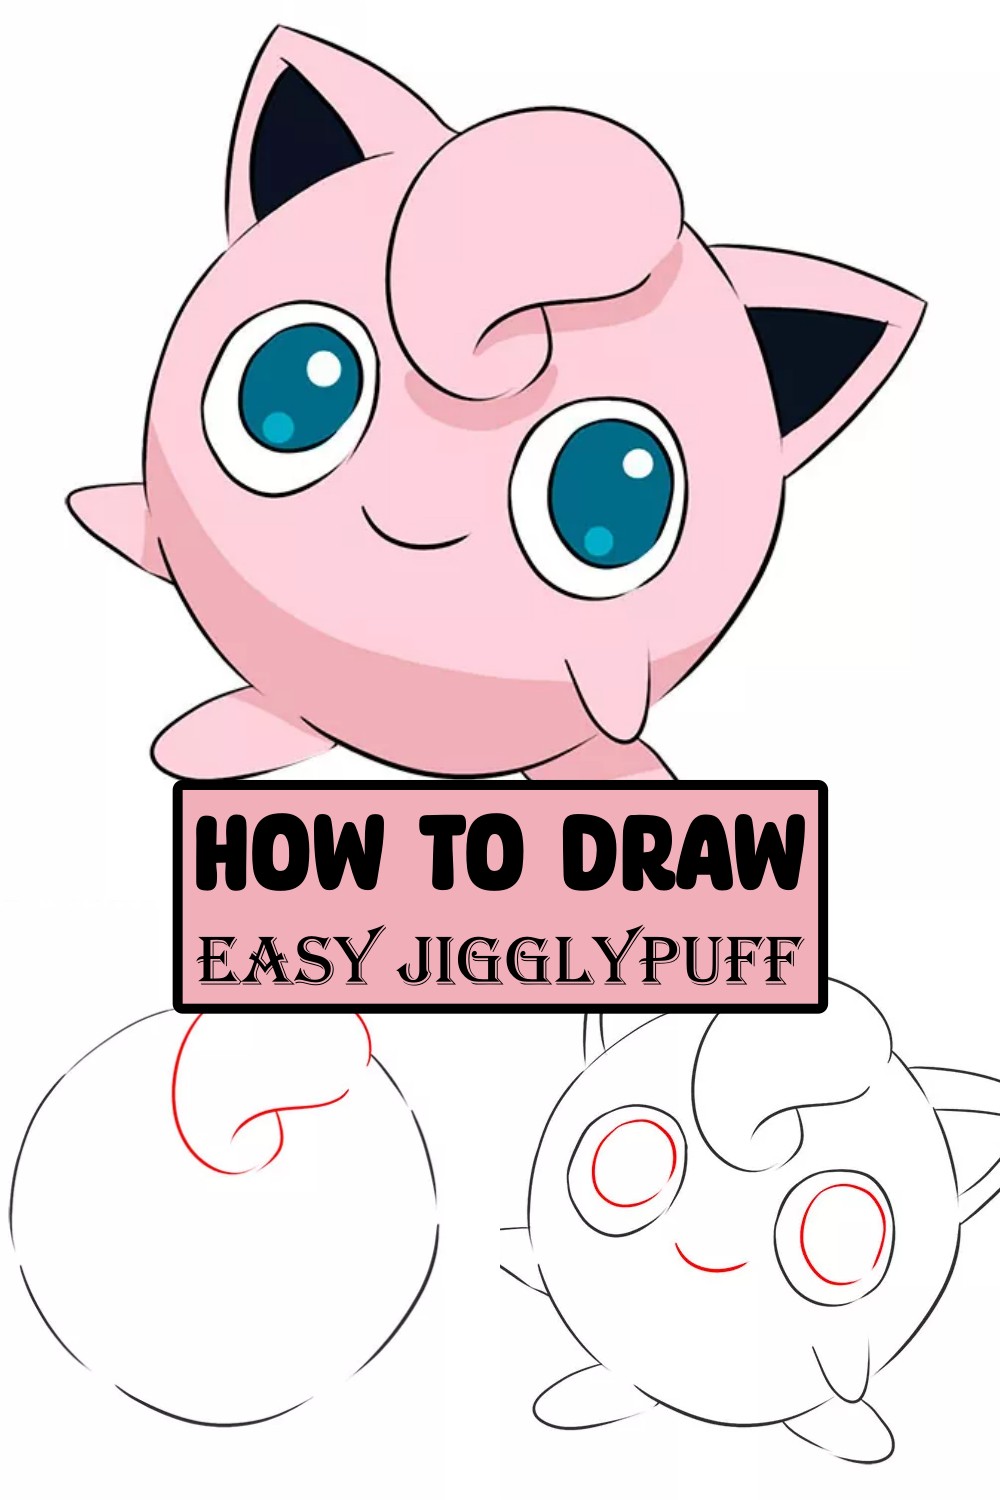 How To Draw Easy Jigglypuff